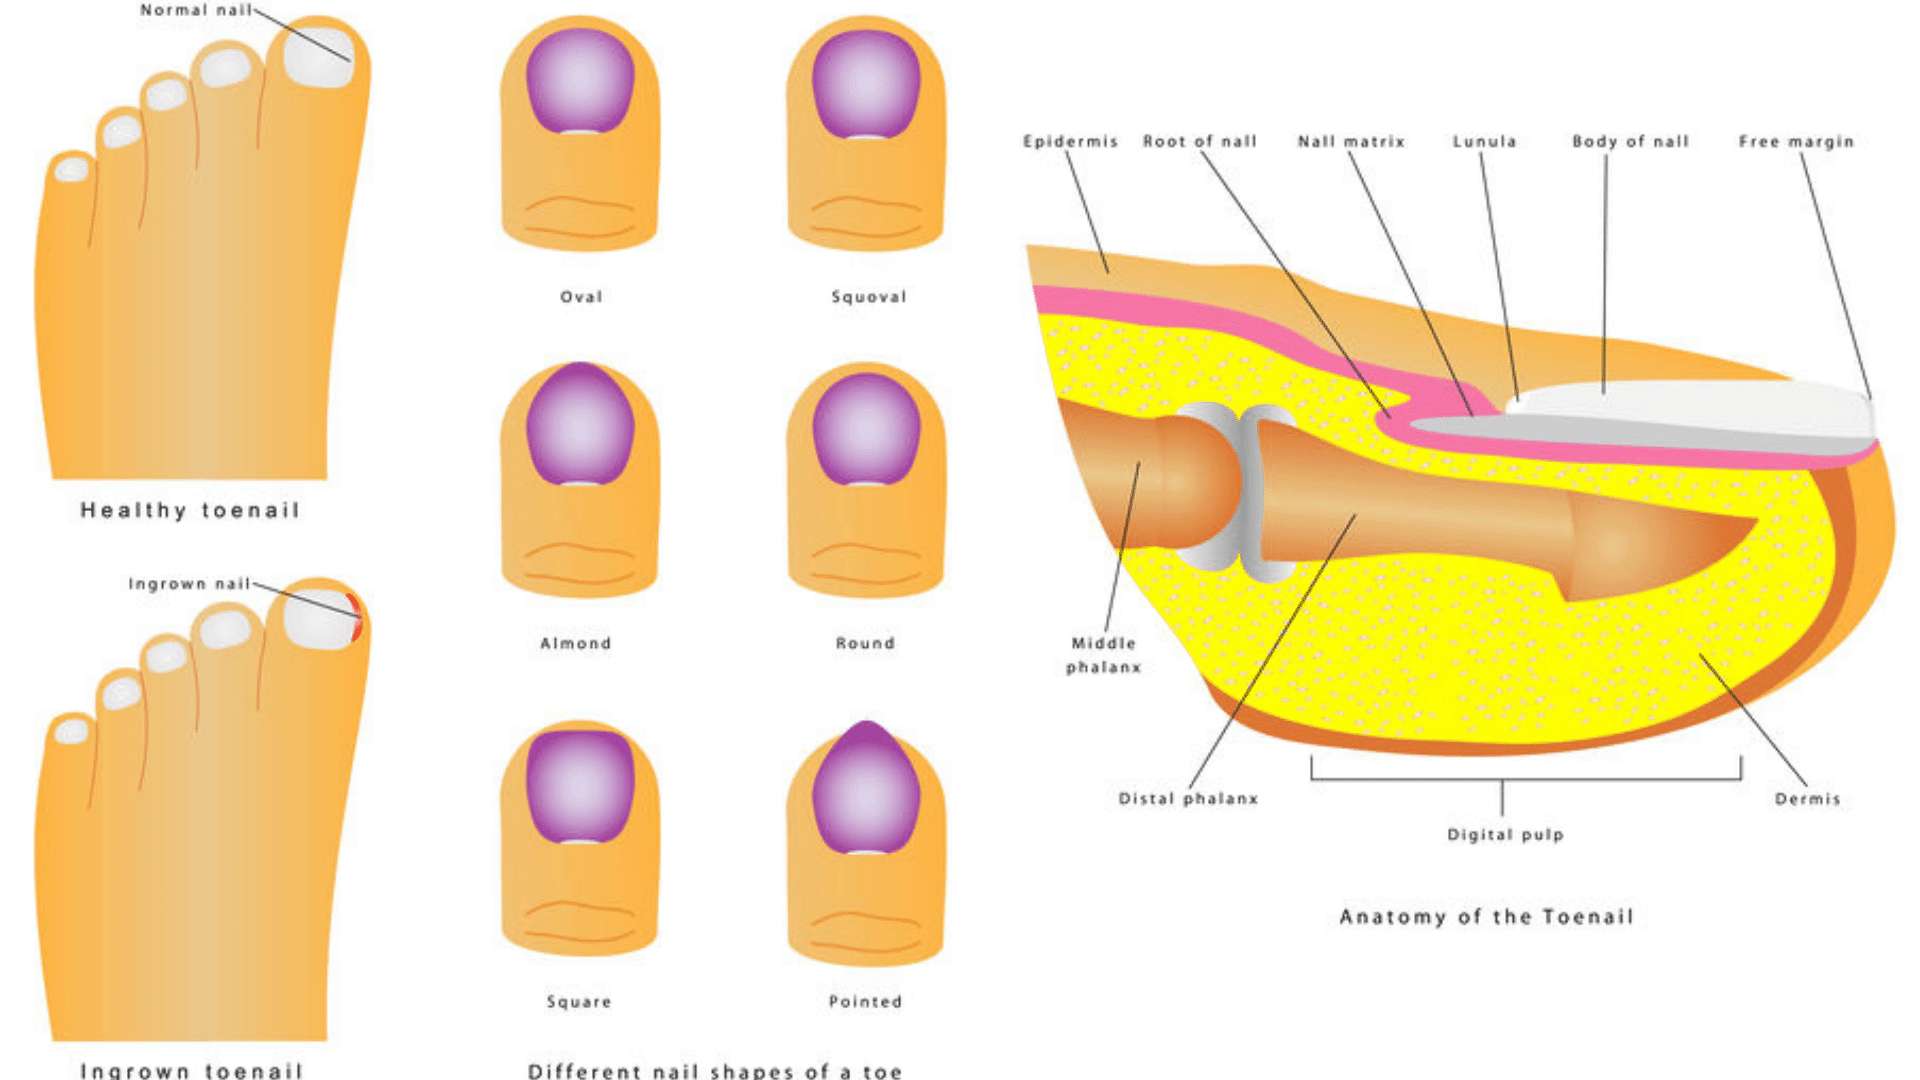 A diagram showing the different shapes of people's nails and the nail matrix